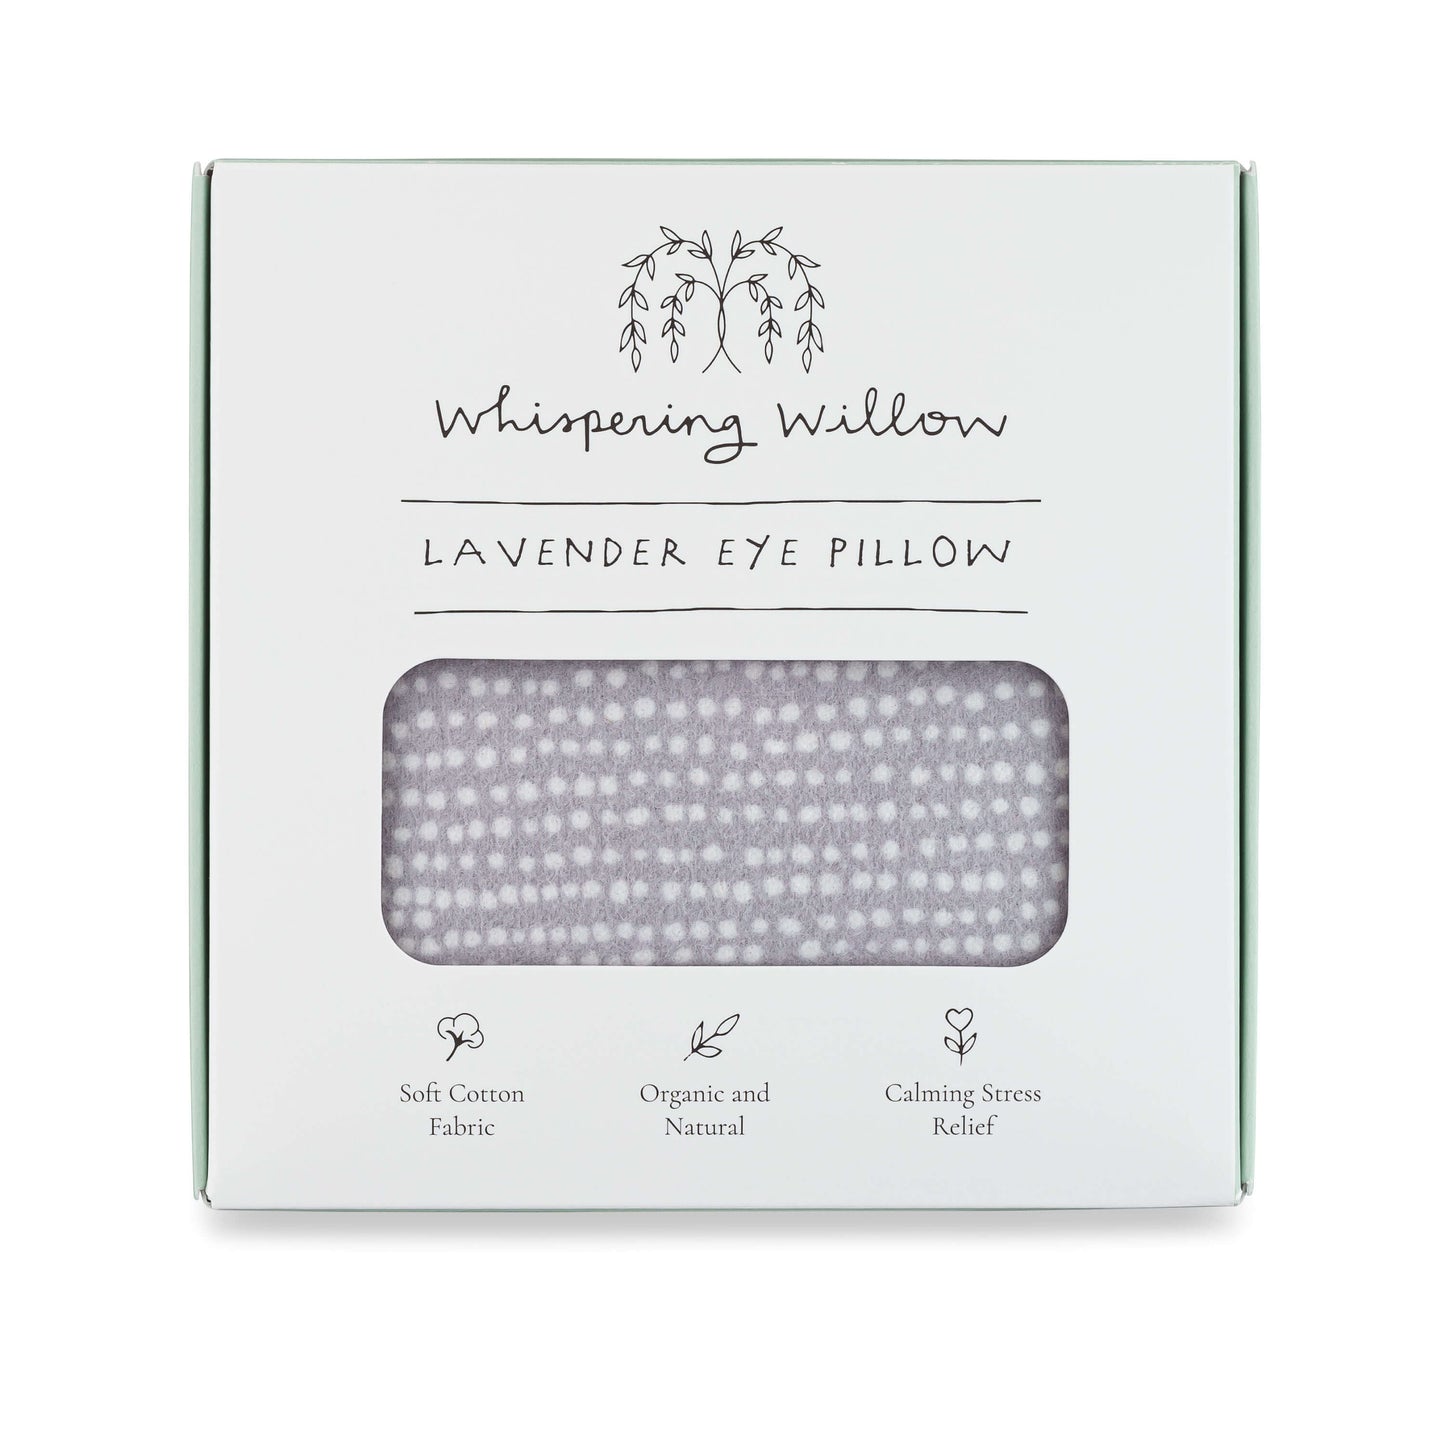 Whispering Willow - Eye Pillow, Lavender - Tranquil Gray - Boxed